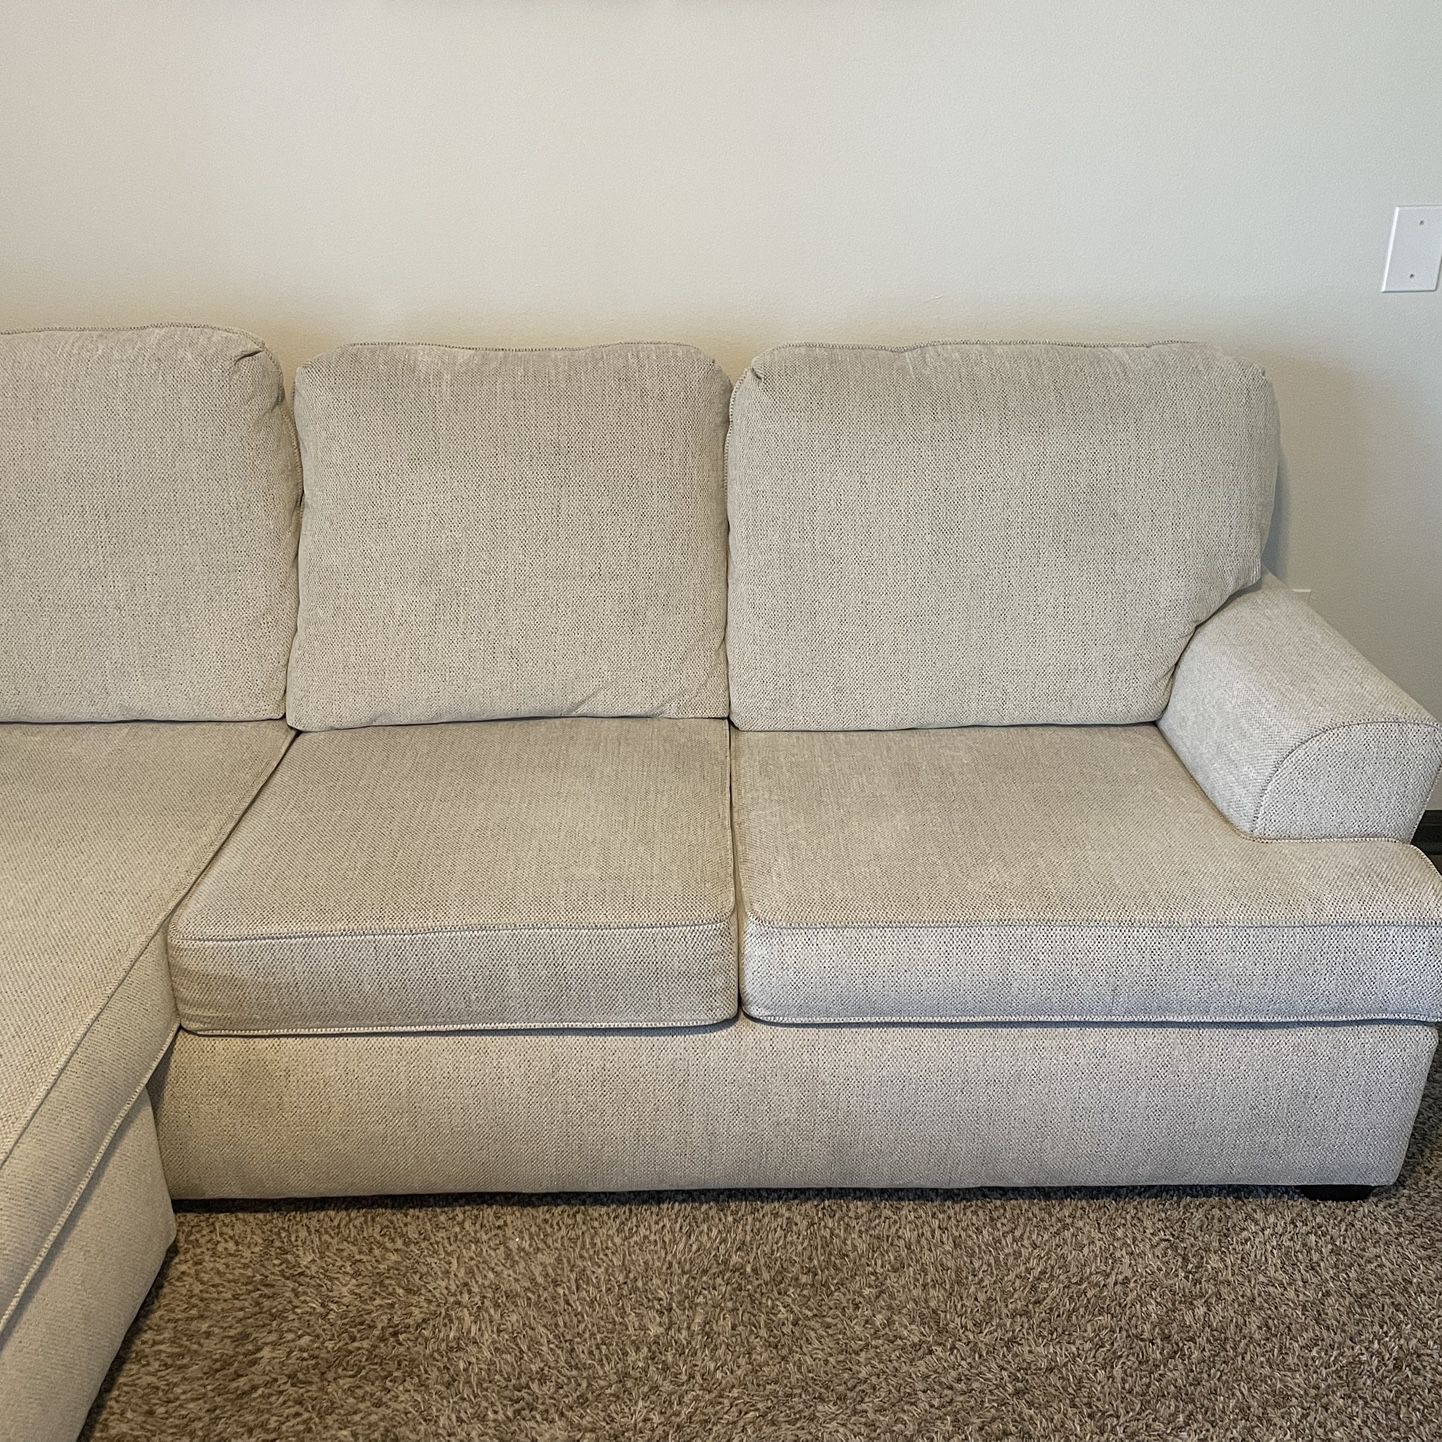 Living Spaces Sectional (1 Year Old)